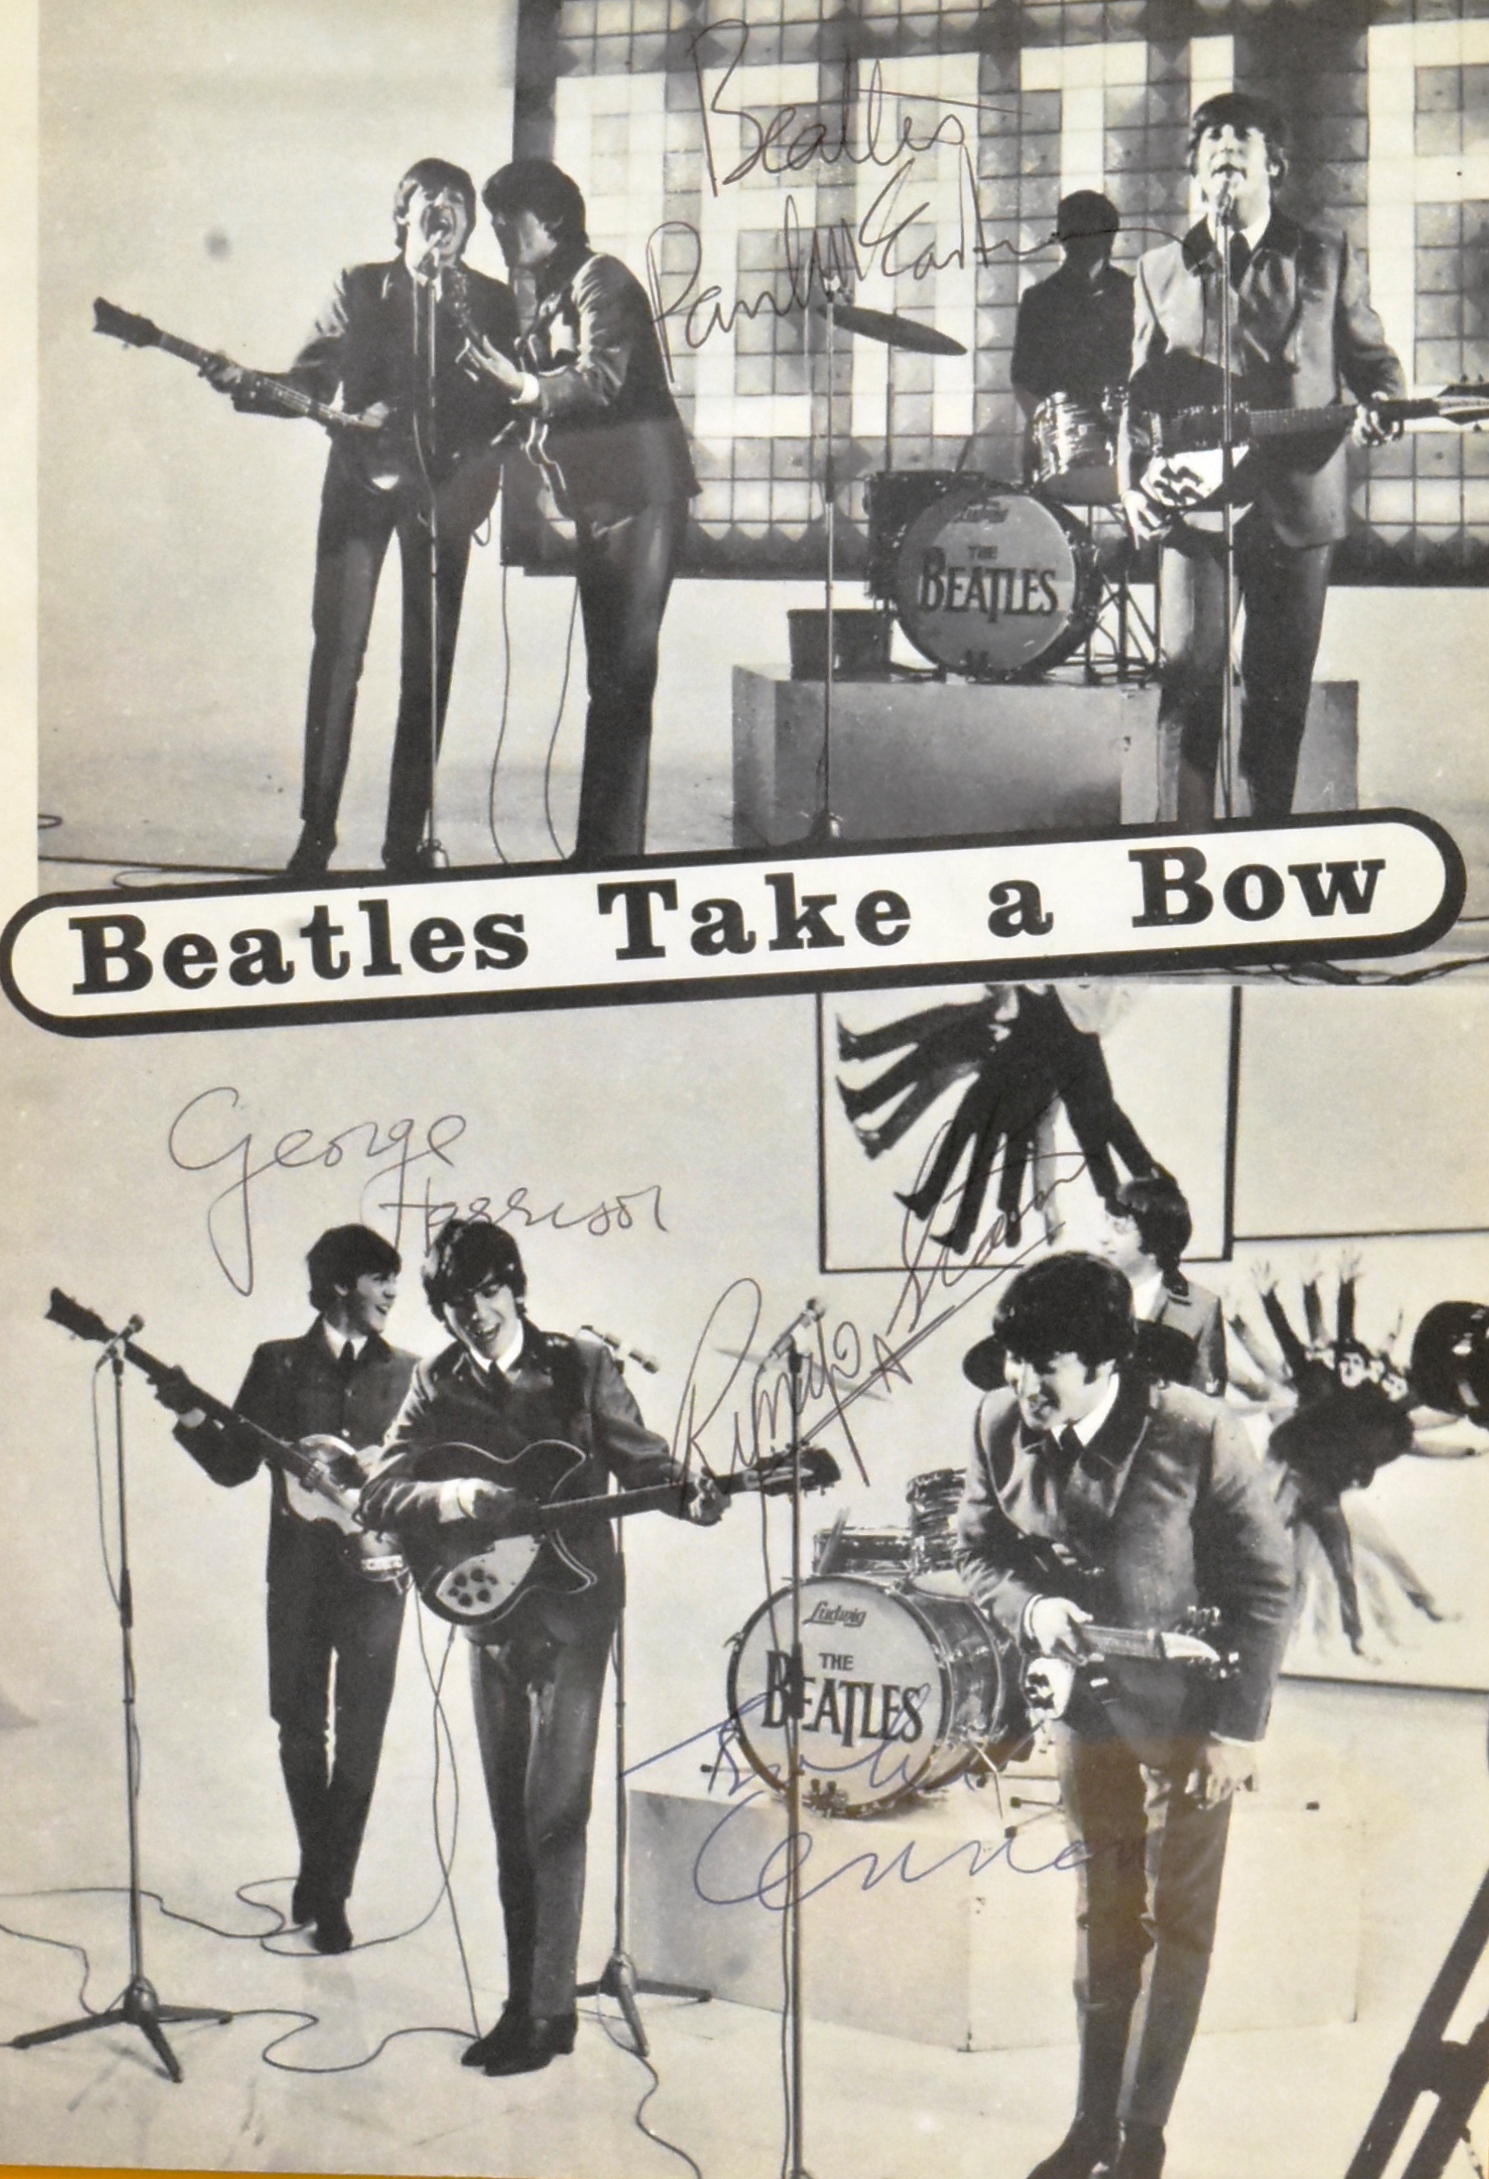 THE BEATLES - MAGAZINE PAGE SIGNED BY ALL MEMBERS